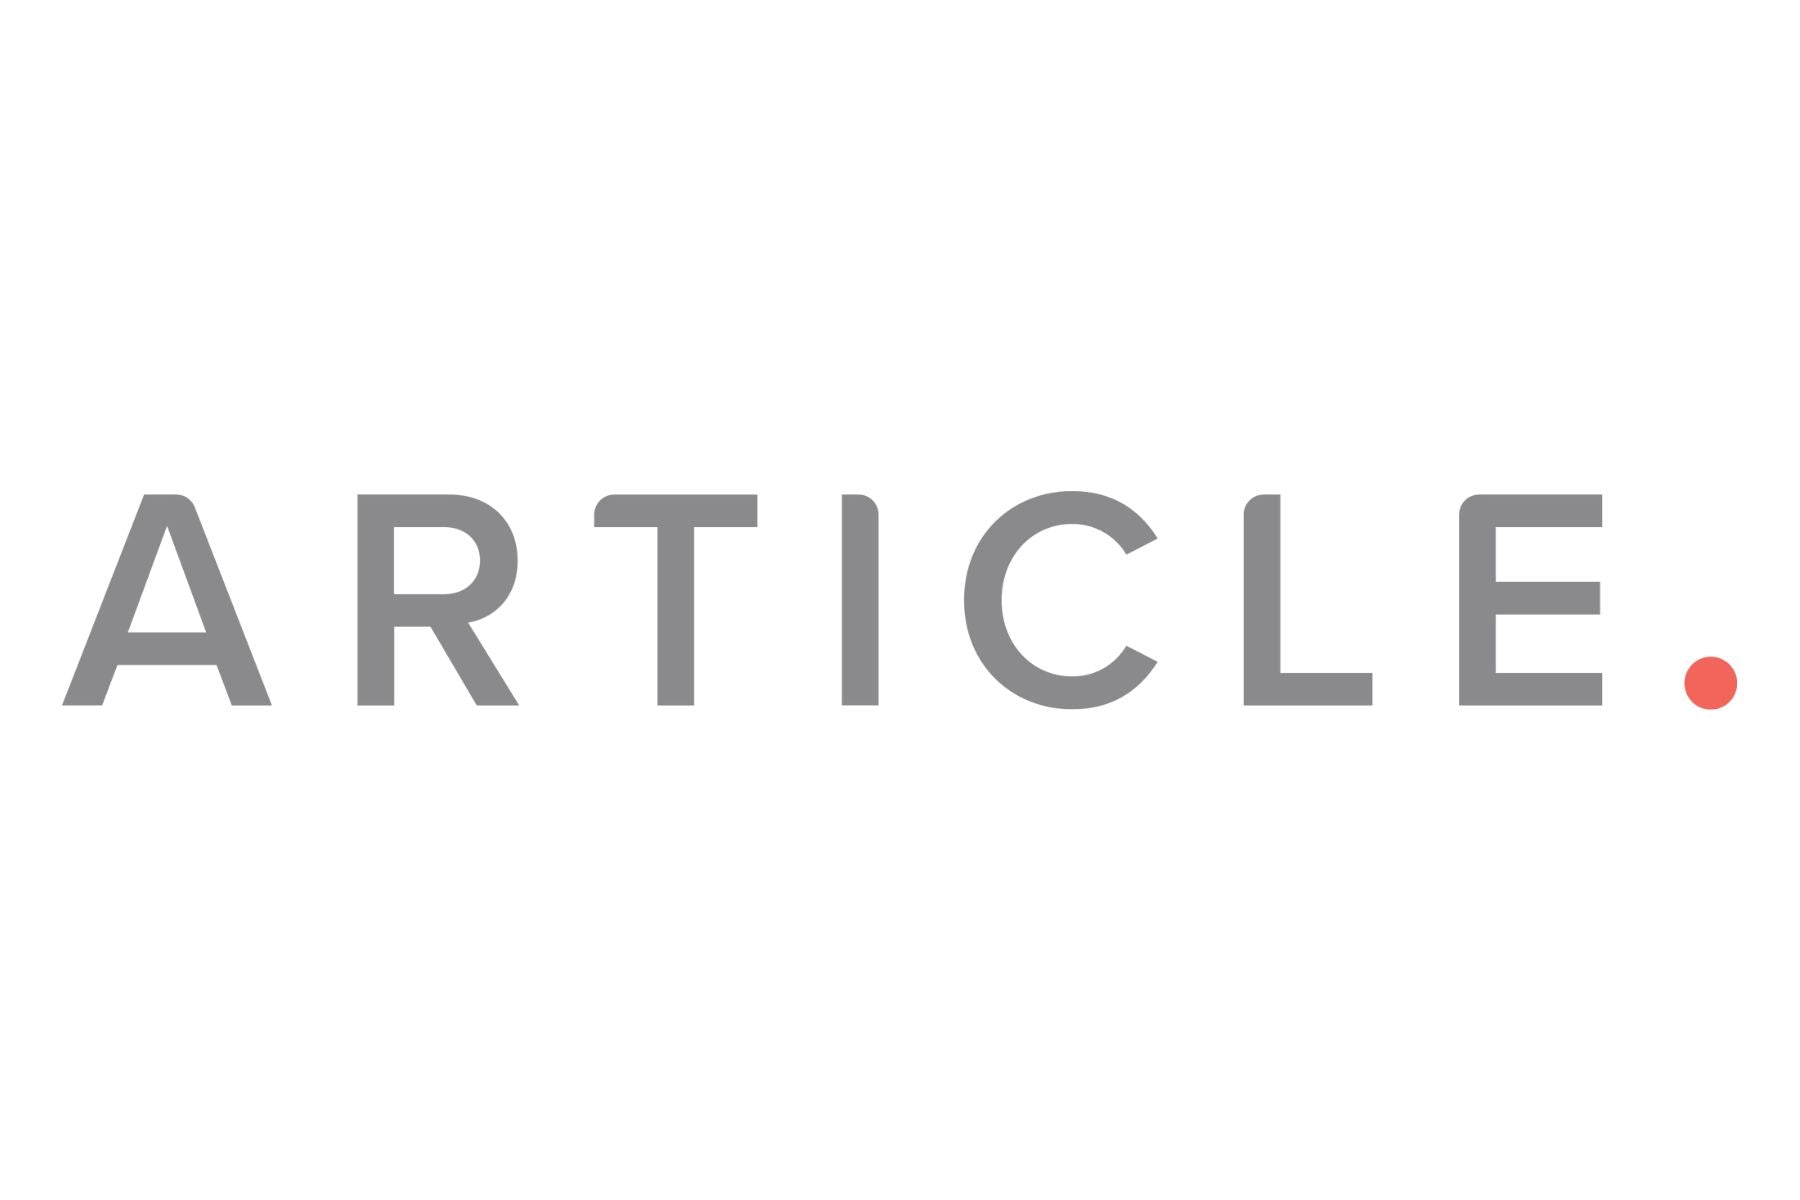 The image displays the word "ARTICLE" in large, gray, capital letters against a white background. There is a small, red dot placed at the end of the word.